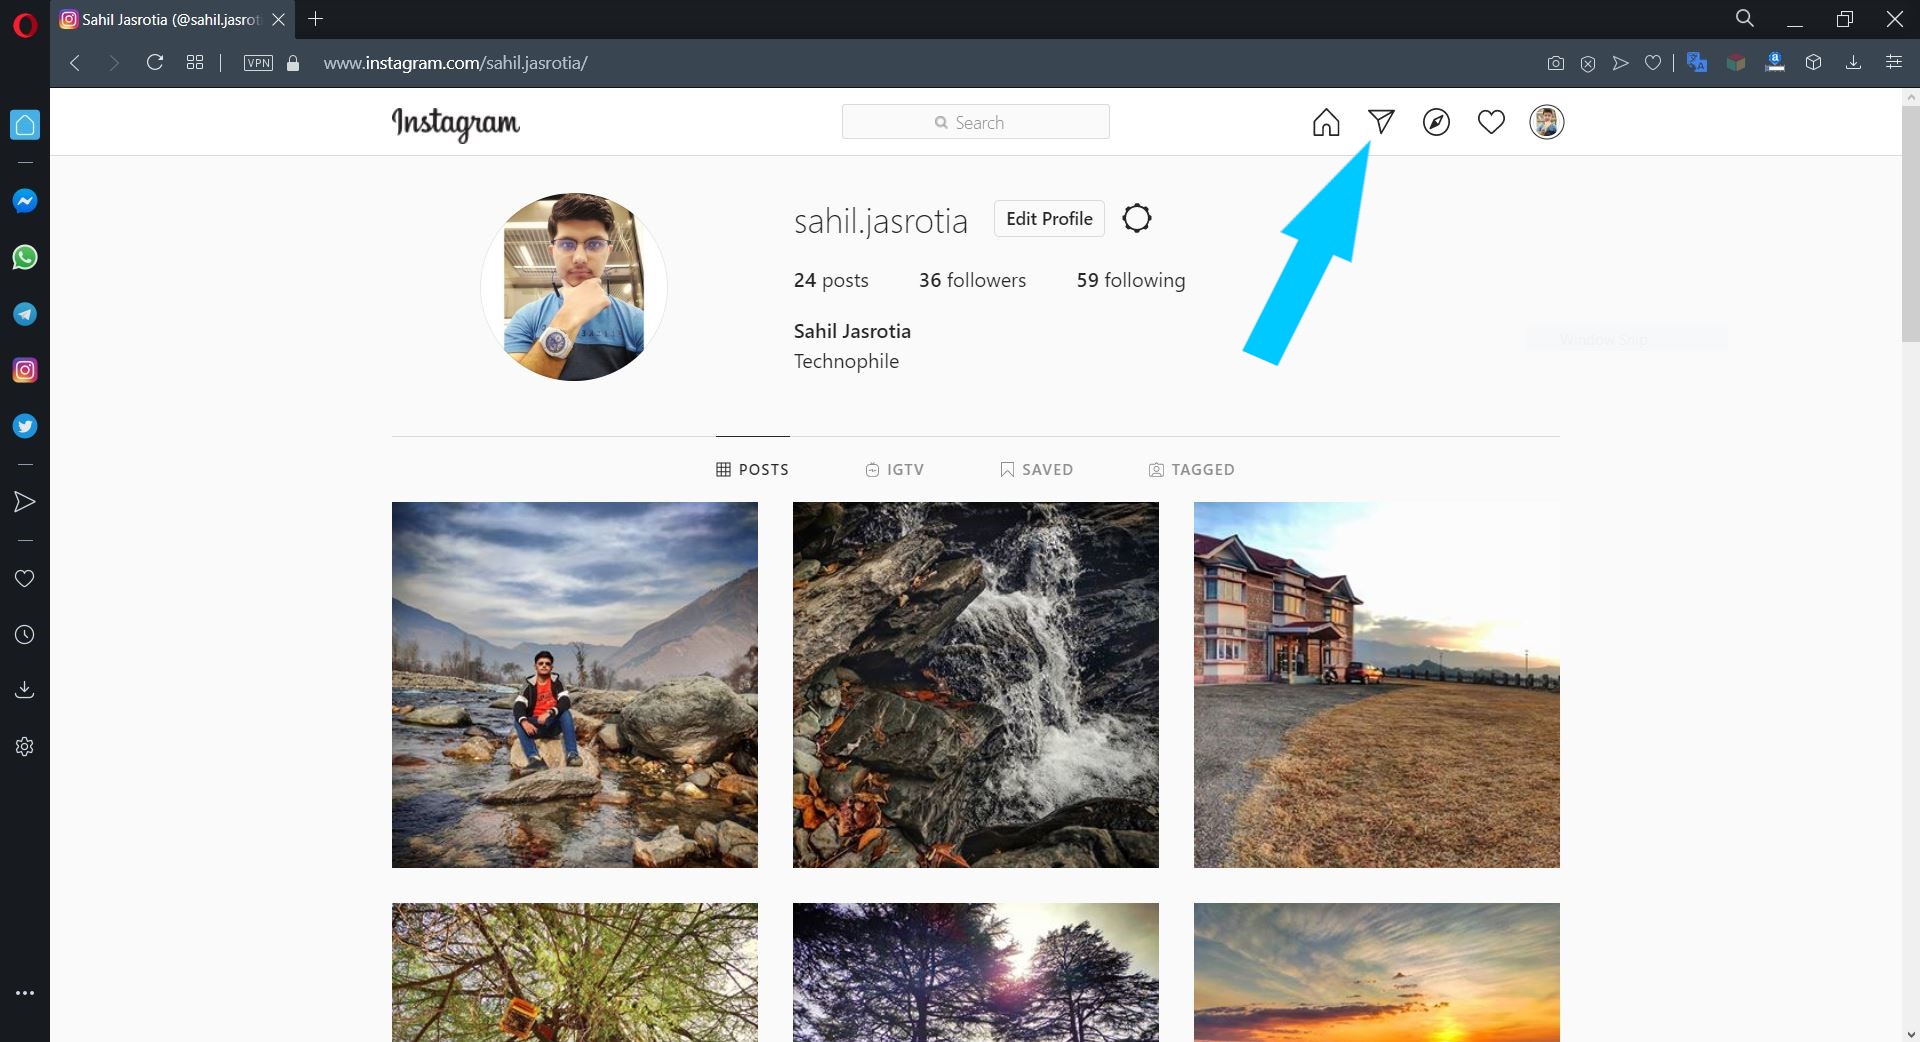 How to Open Instagram Messages on Laptop or Desktop PC